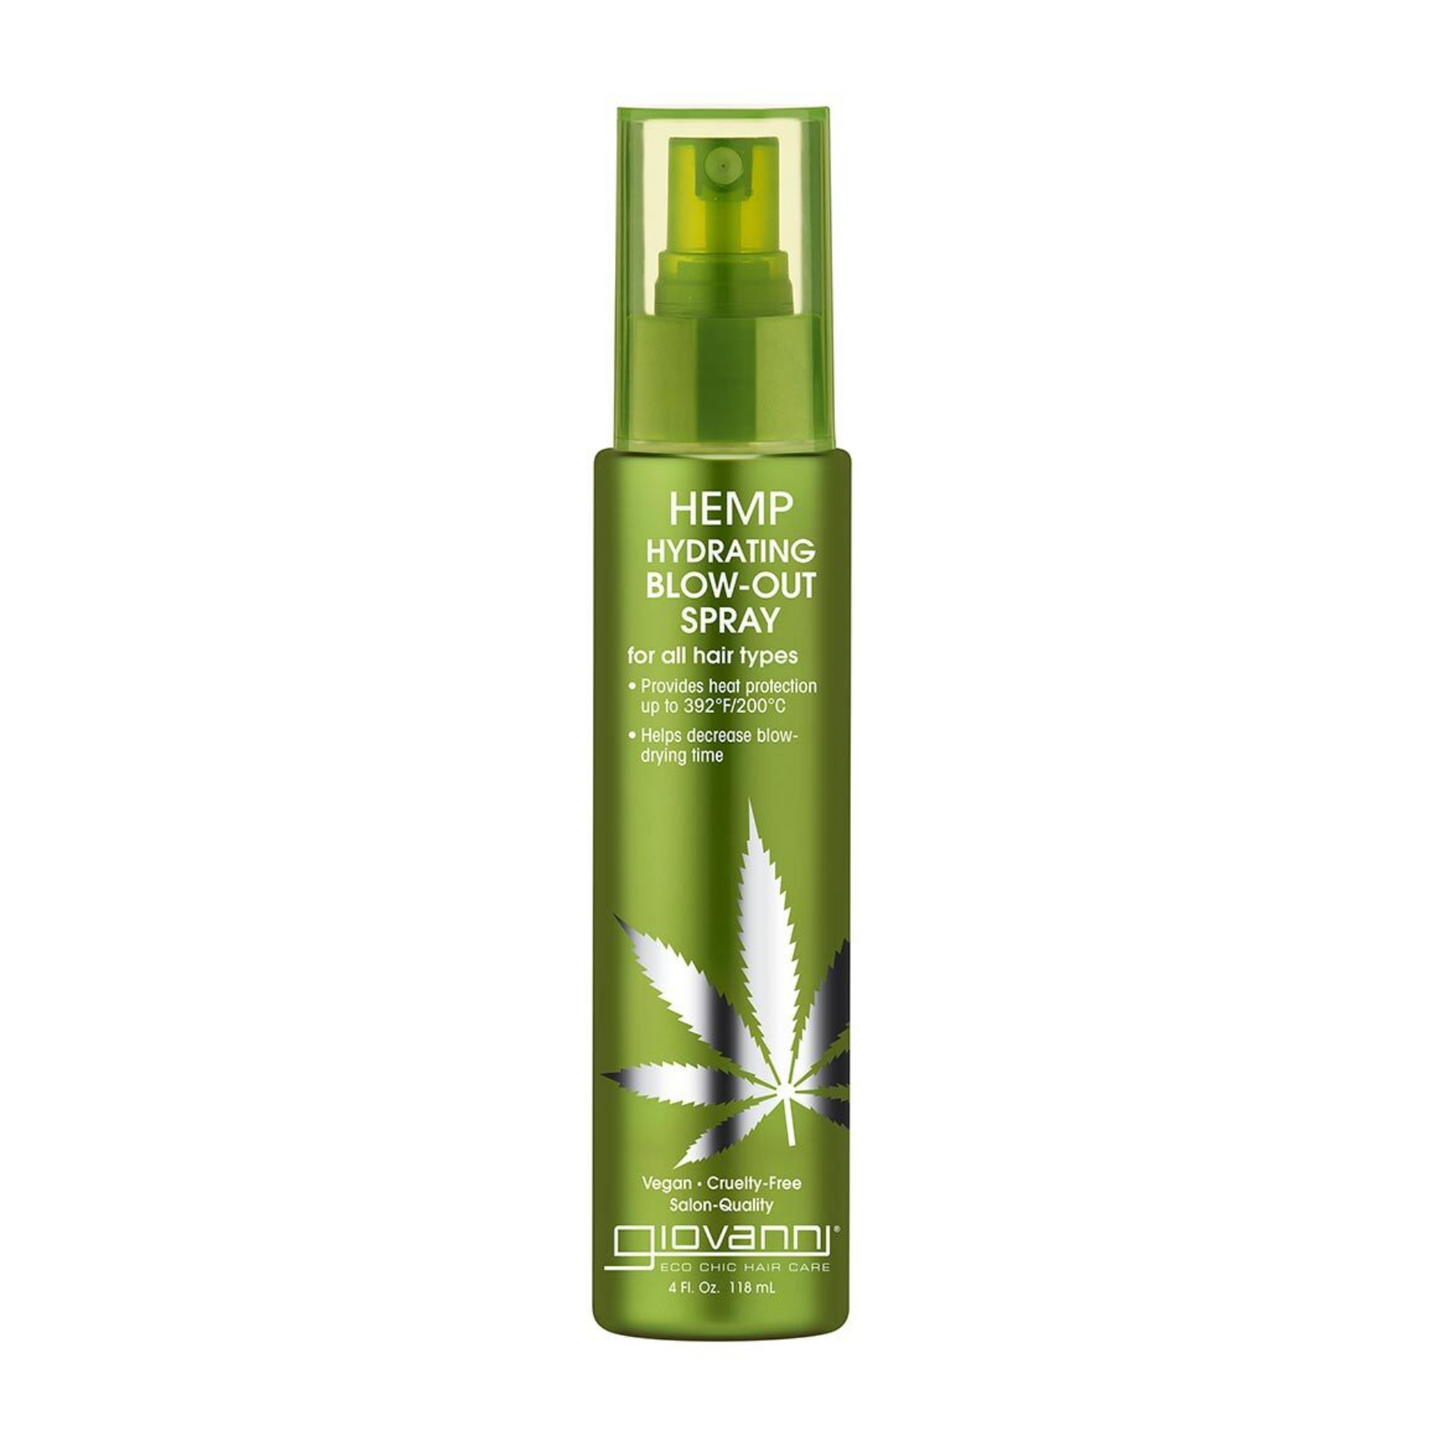 Giovanni Hemp Hydrating Blow Out Spray 118mL, For All Hair Types